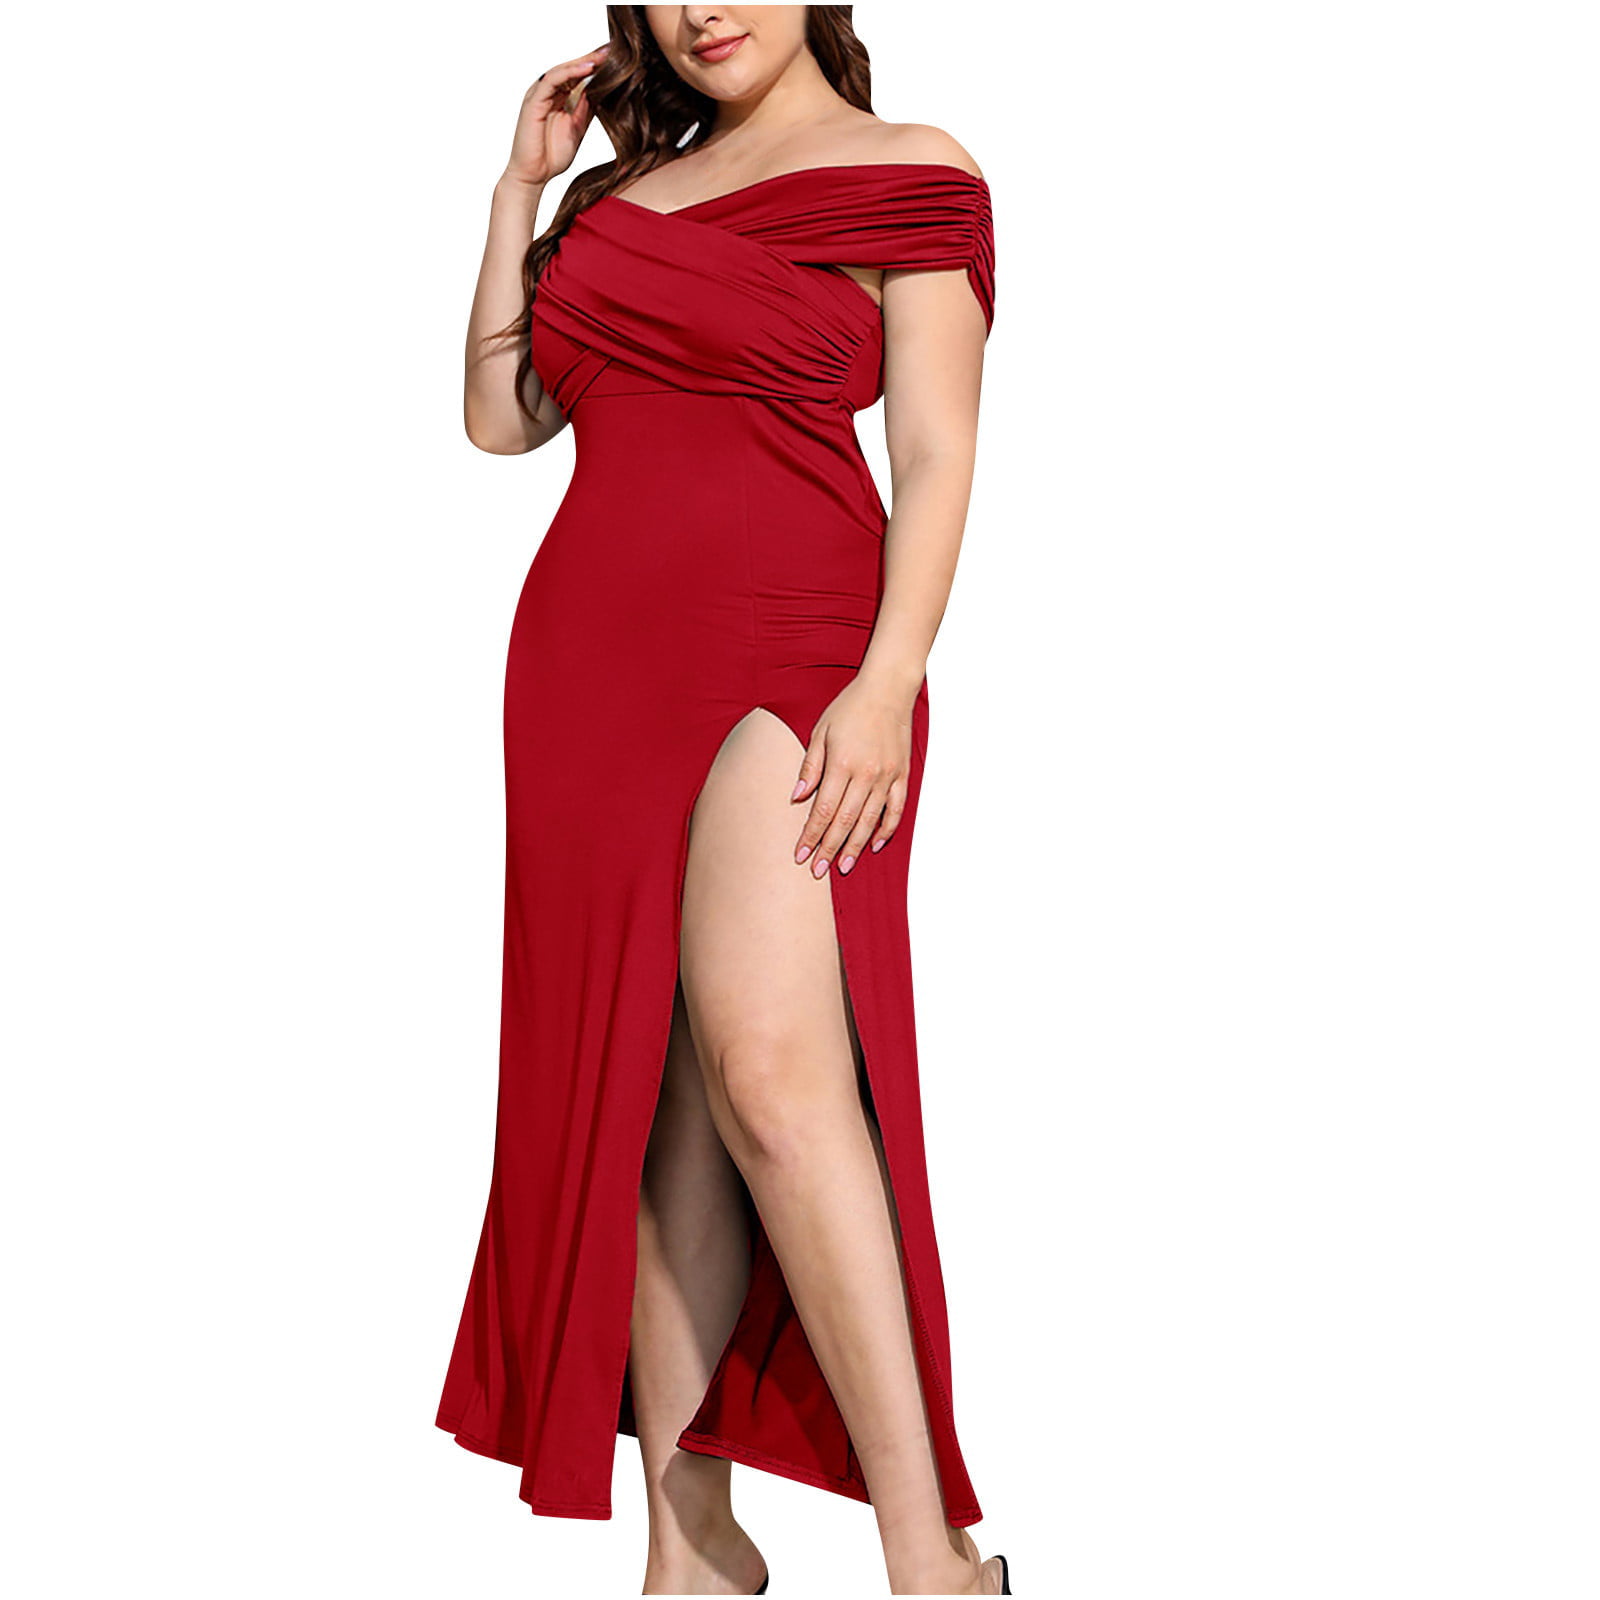 Plus Size Dresses for Women Lace Stitching Solid Color Cocktail Evening Dress Wedding Gowns - Walmart.com